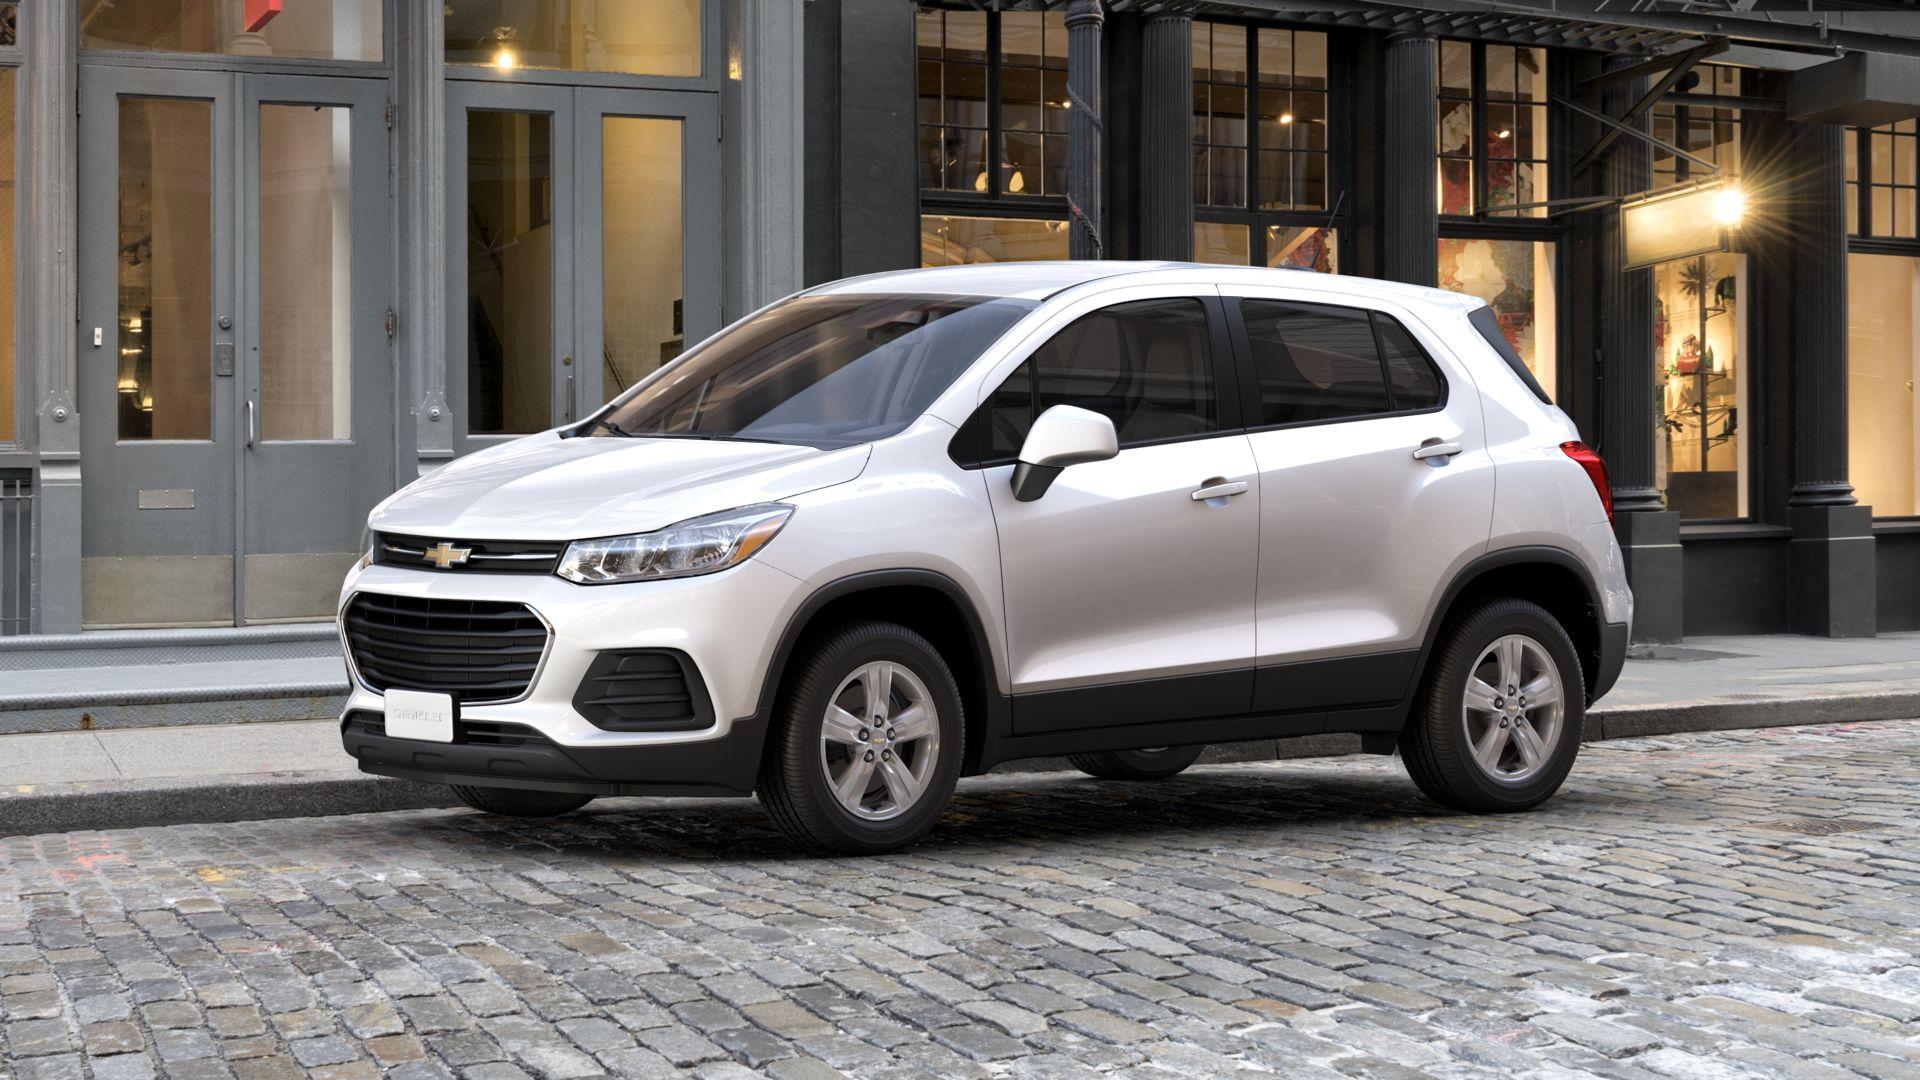 2017 Chevrolet Trax Vehicle Photo in MOON TOWNSHIP, PA 15108-2571